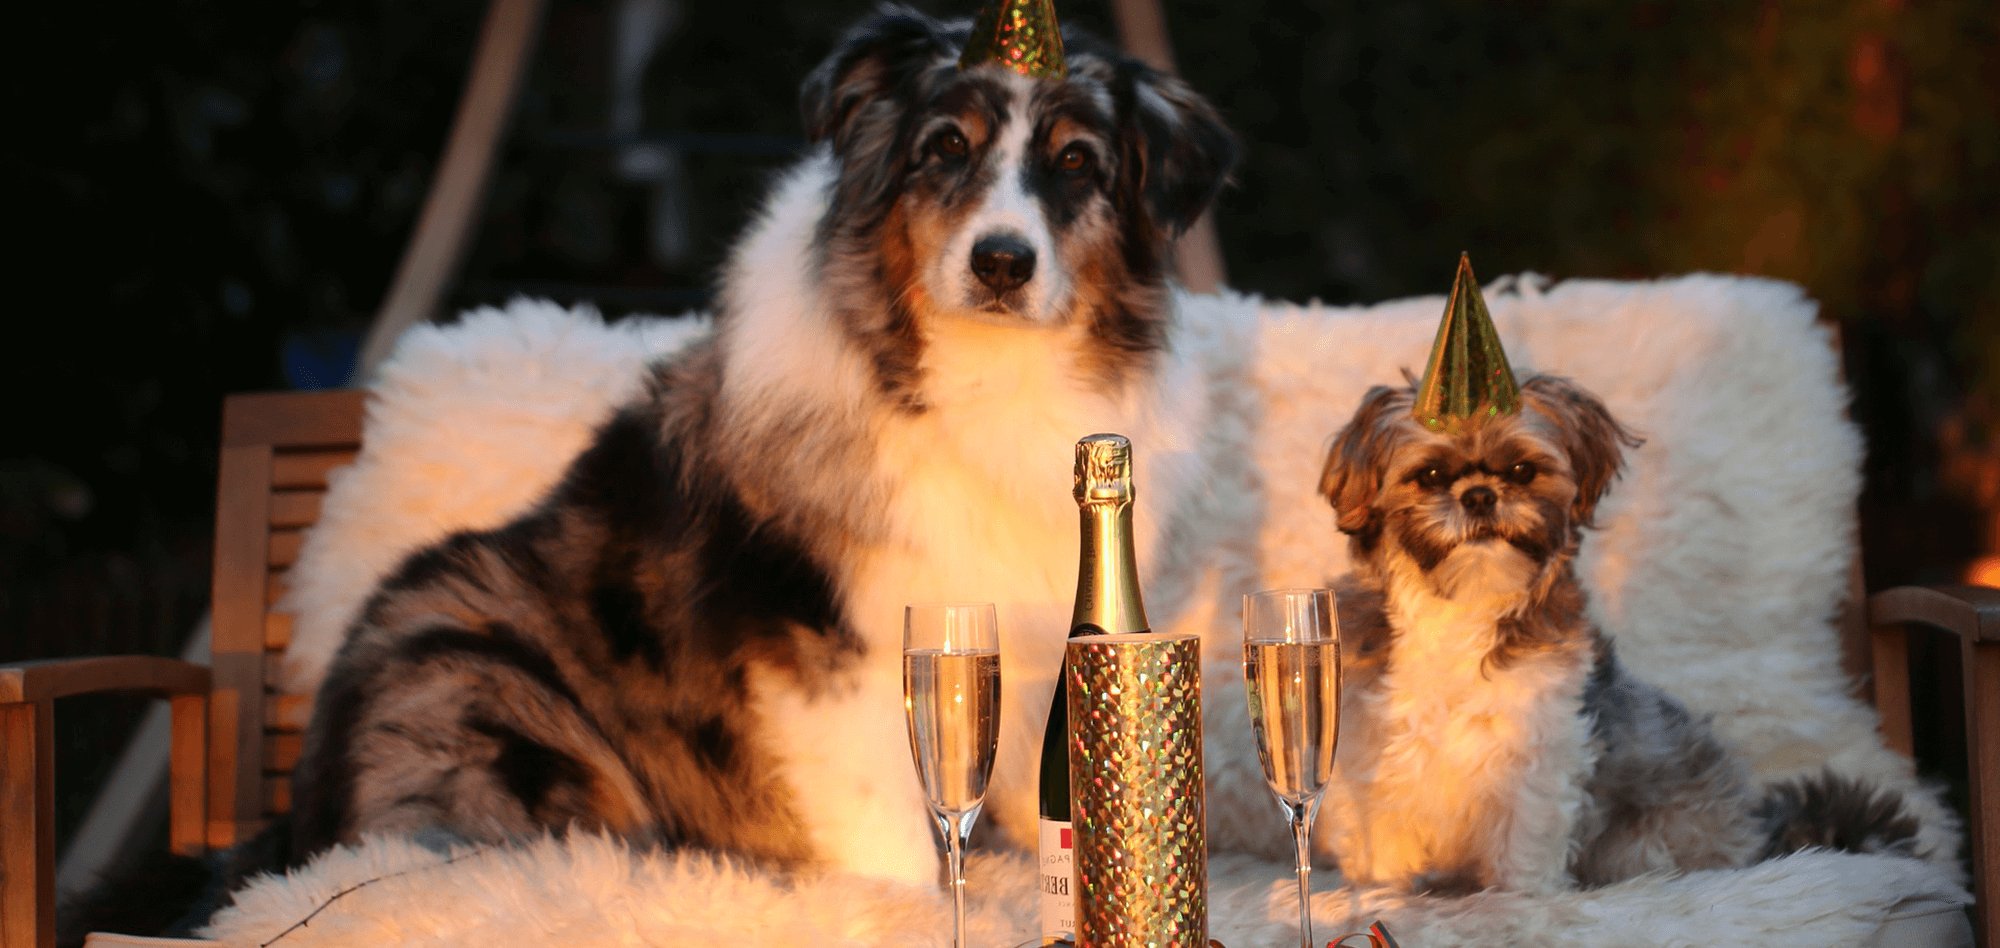 New years eve with dog: Tips for a relaxed night